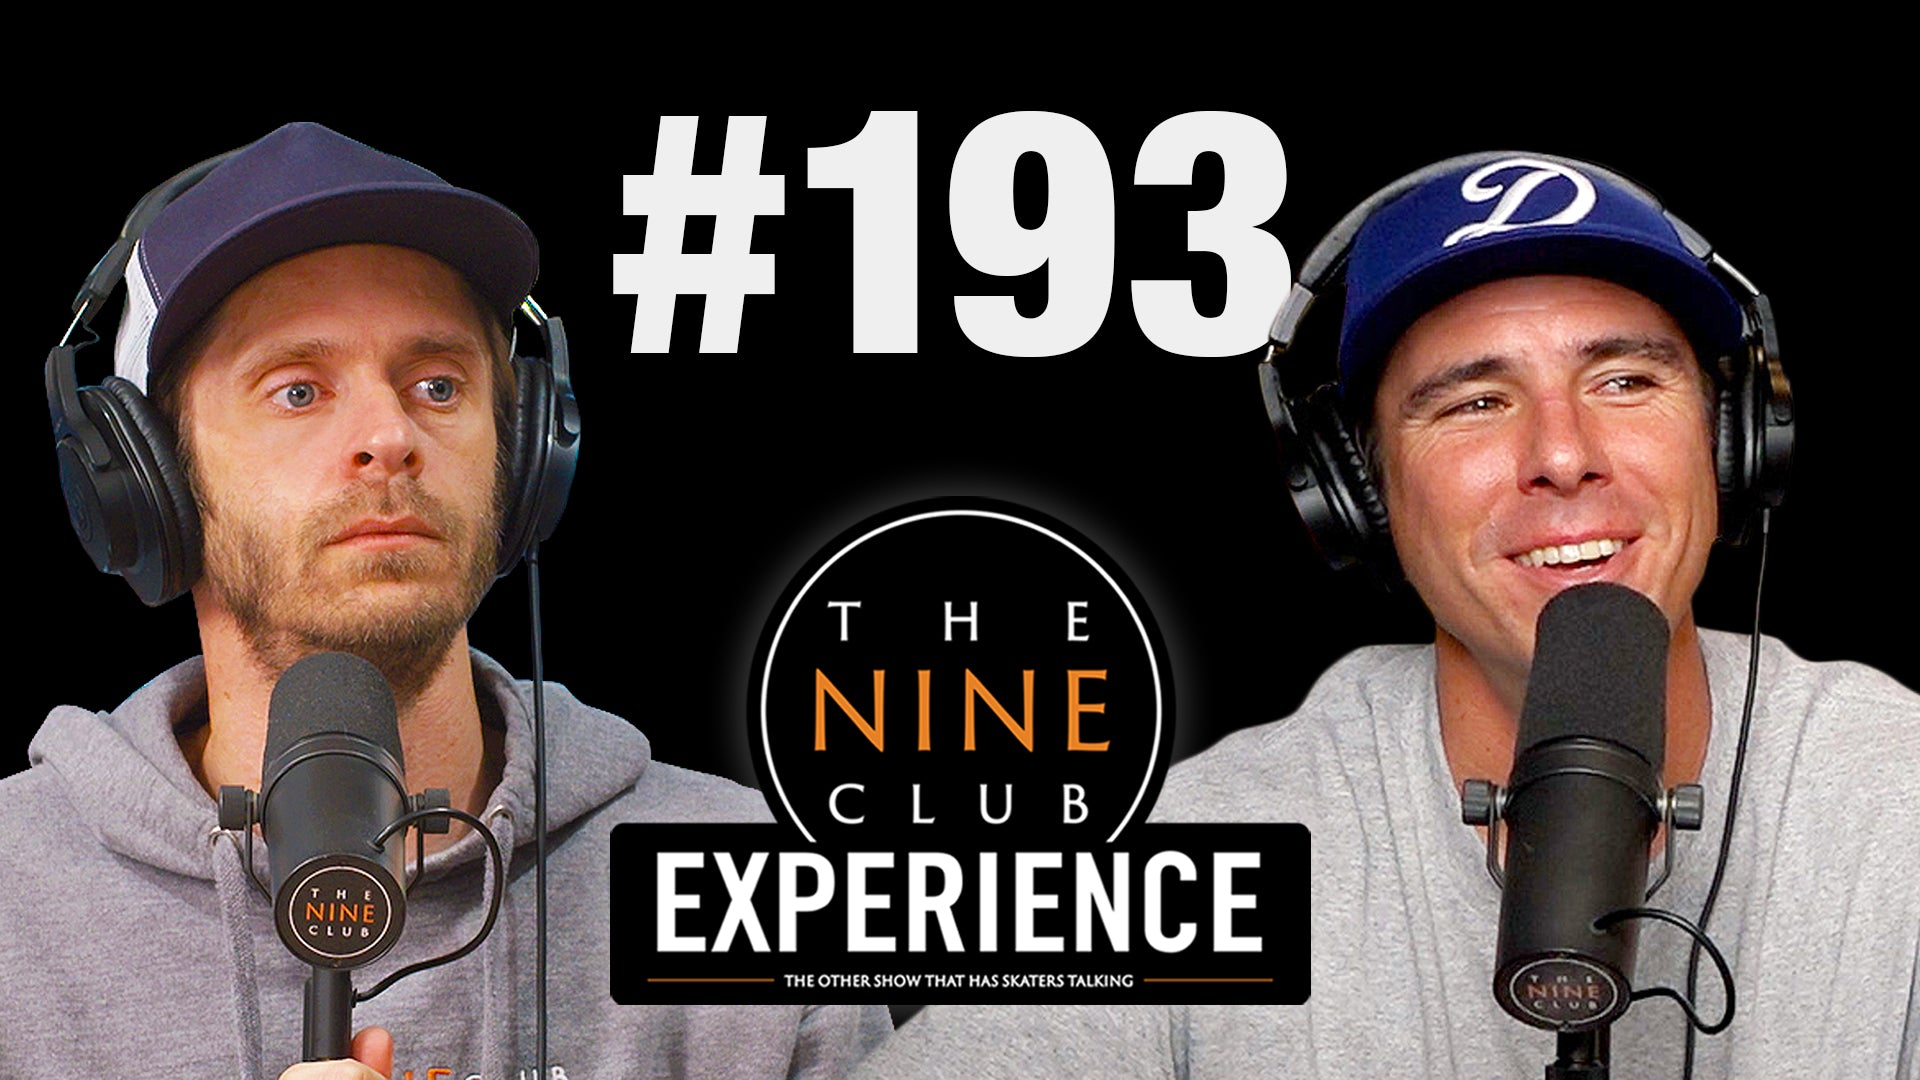 EXPERIENCE LIVE! #193 - There Skateboards, Money Time, Union Square